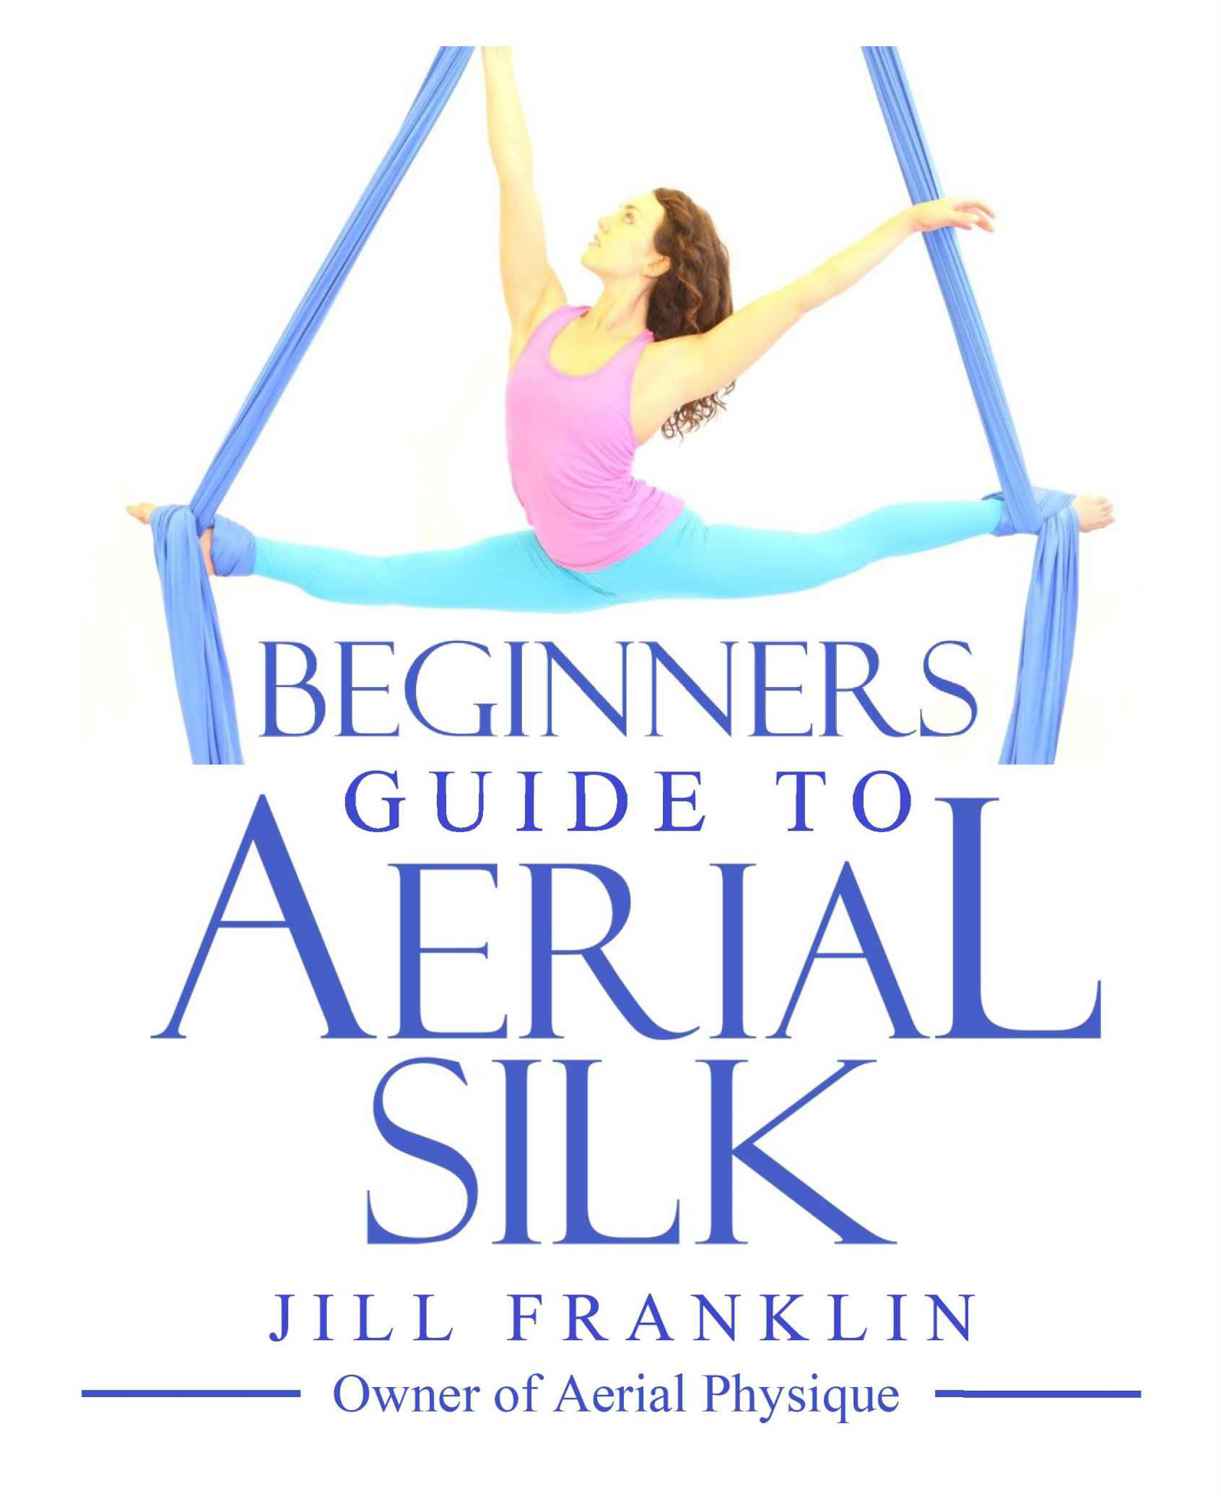 Beginners Guide to Aerial Silk Copyright 2014 by Jill Franklin All rights - photo 1